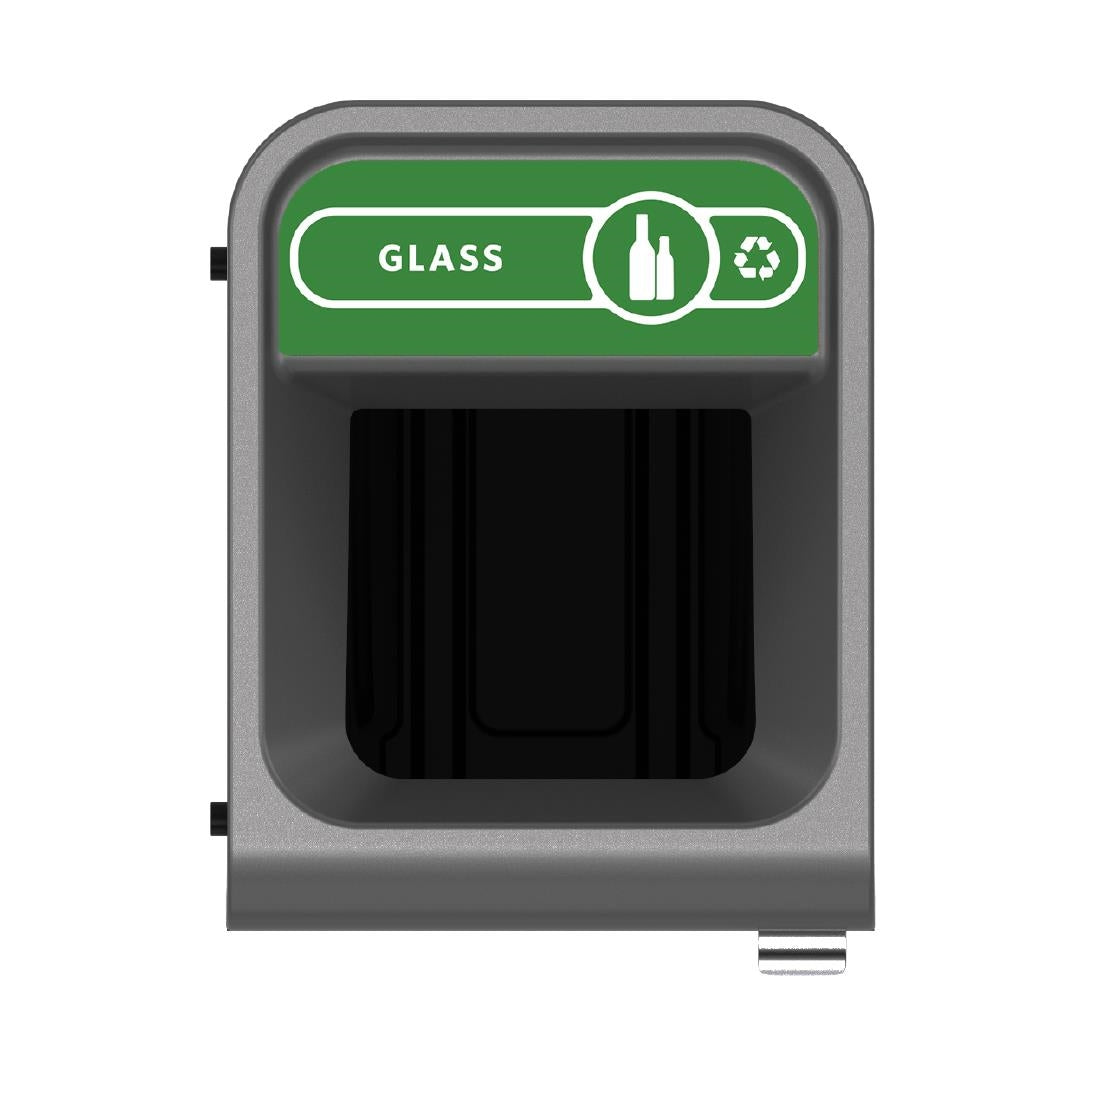 CX966 Rubbermaid Configure Recycling Bin with Glass Recycling Label Green 57Ltr JD Catering Equipment Solutions Ltd